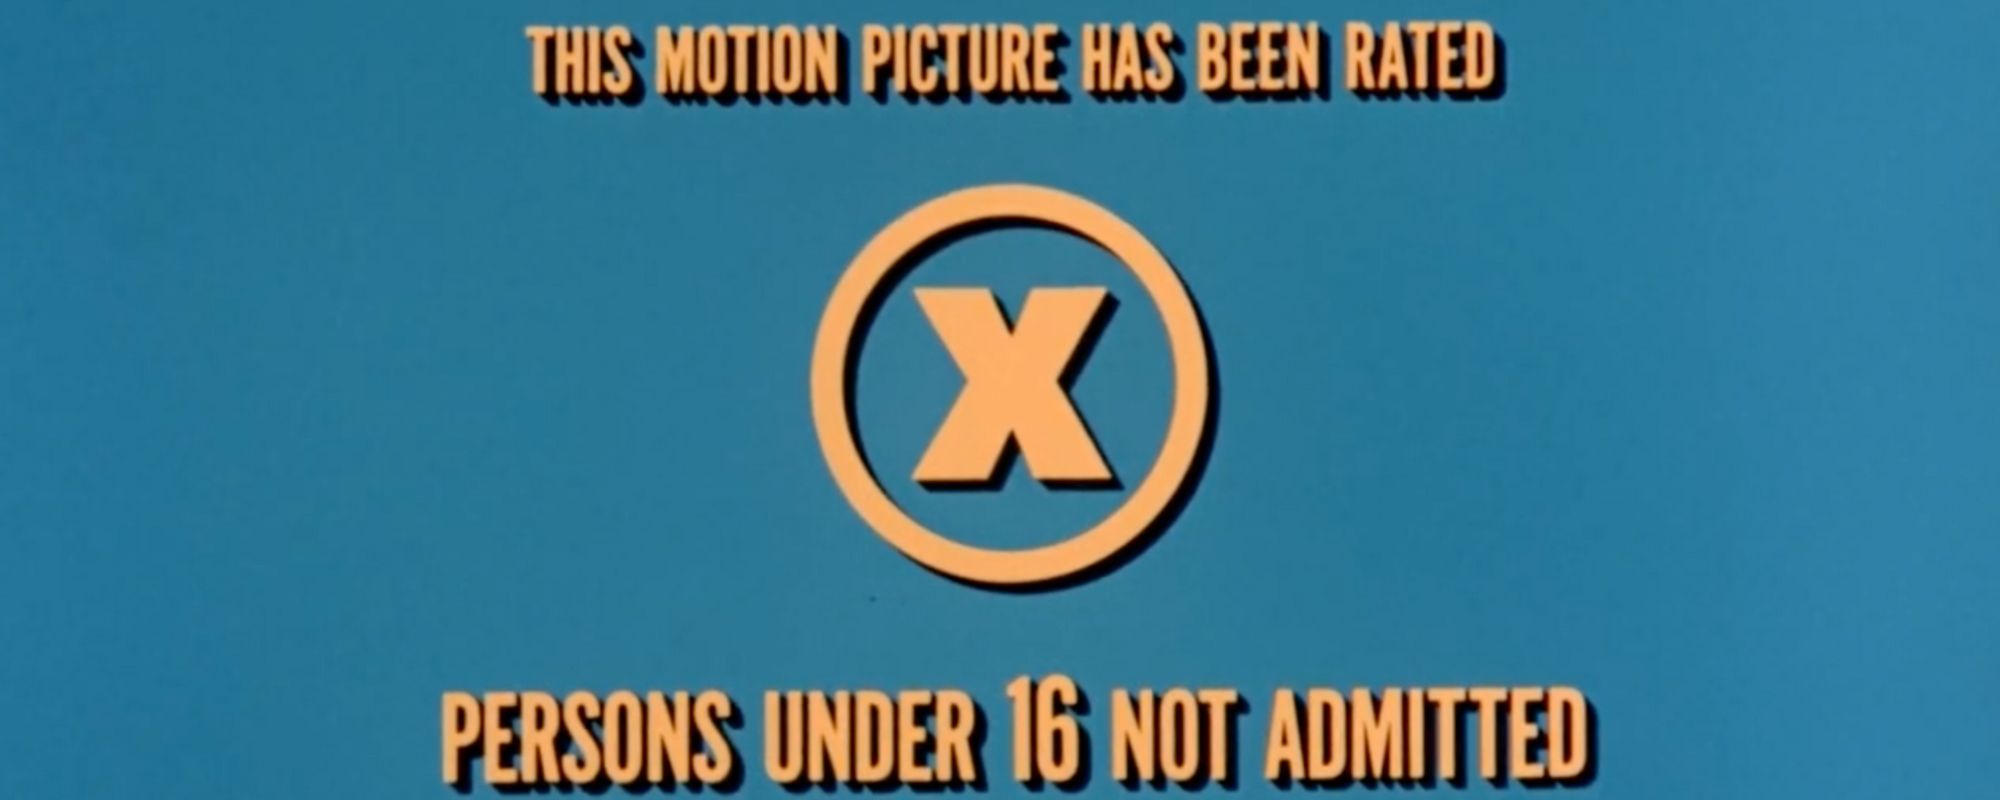 The Brief and Scandalous History of the X Rating